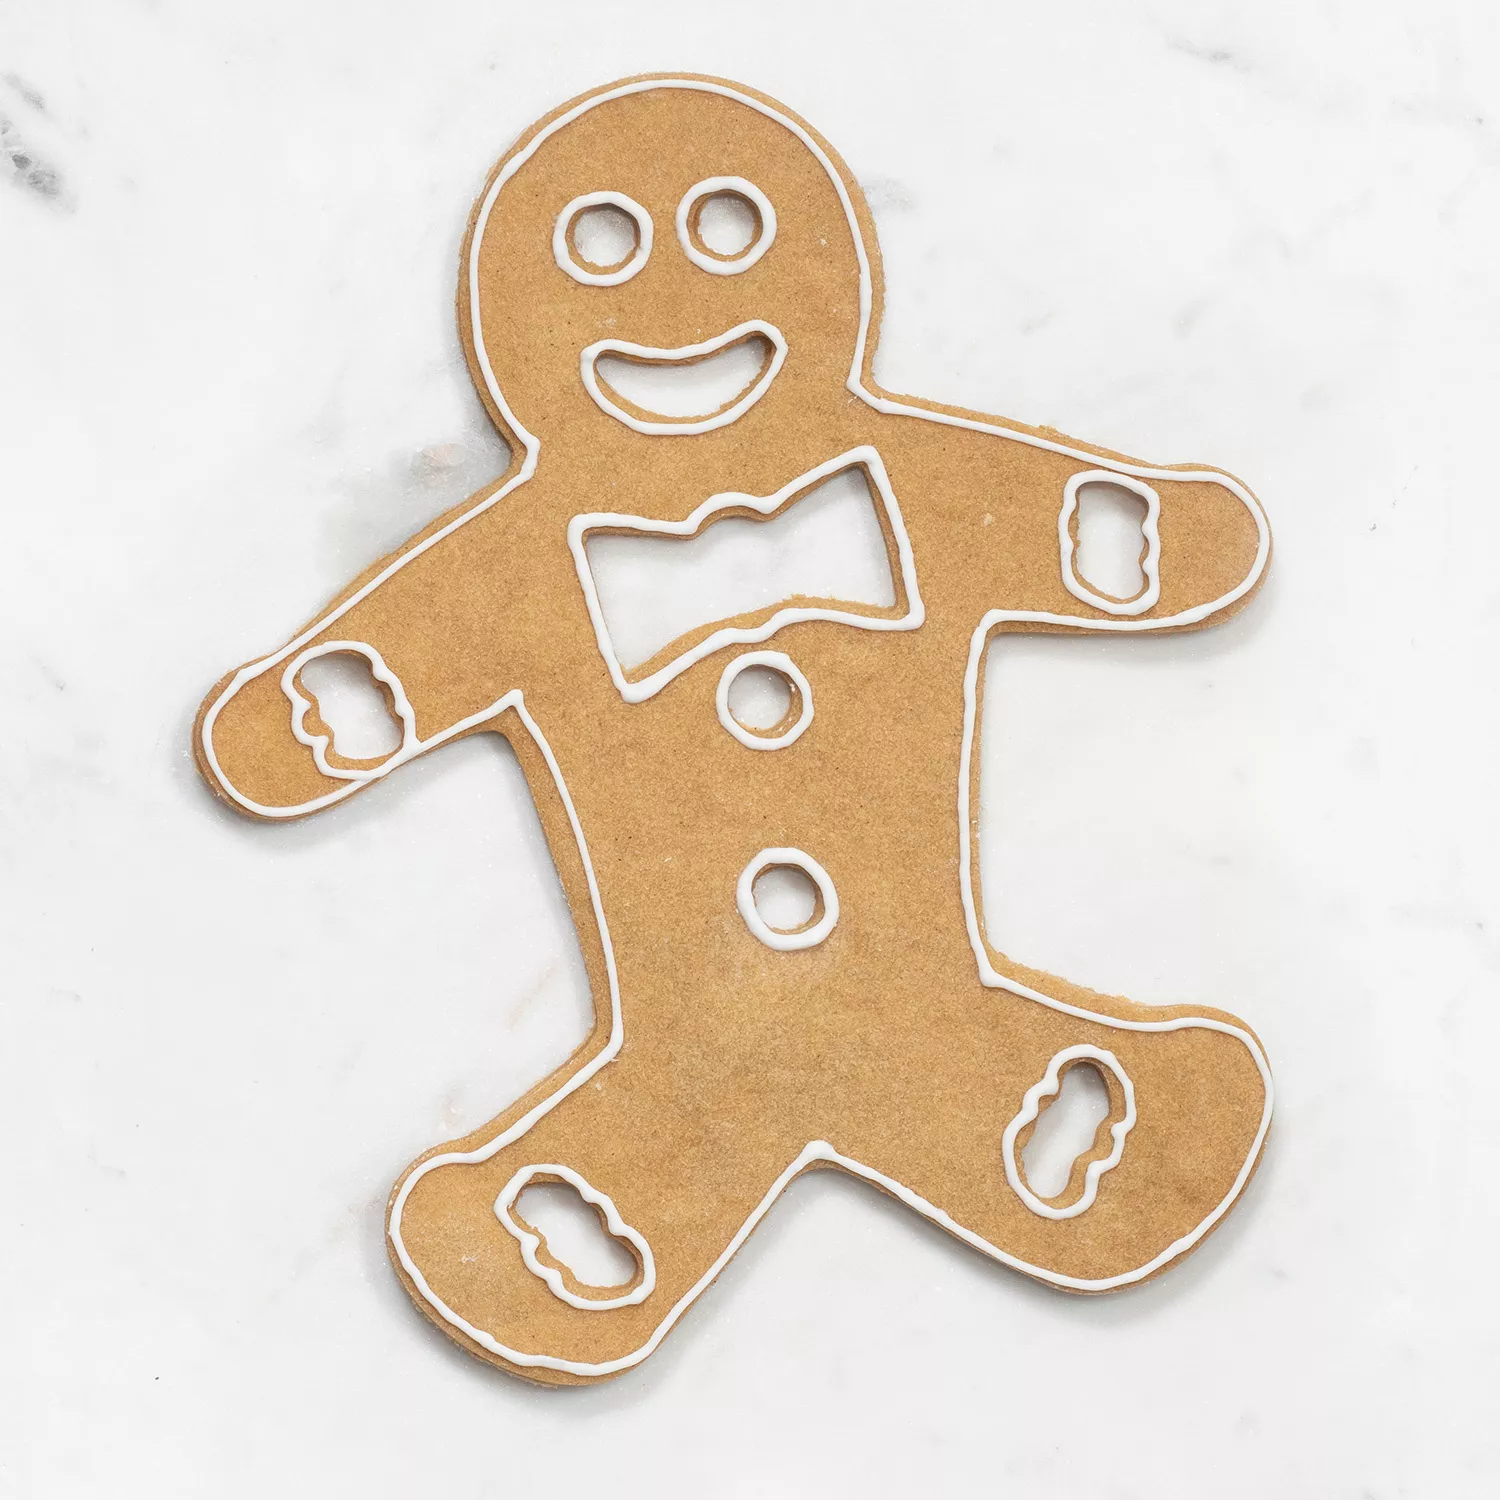 Sur La Table Large Gingerbread Man Copper-Plated Cookie Cutter